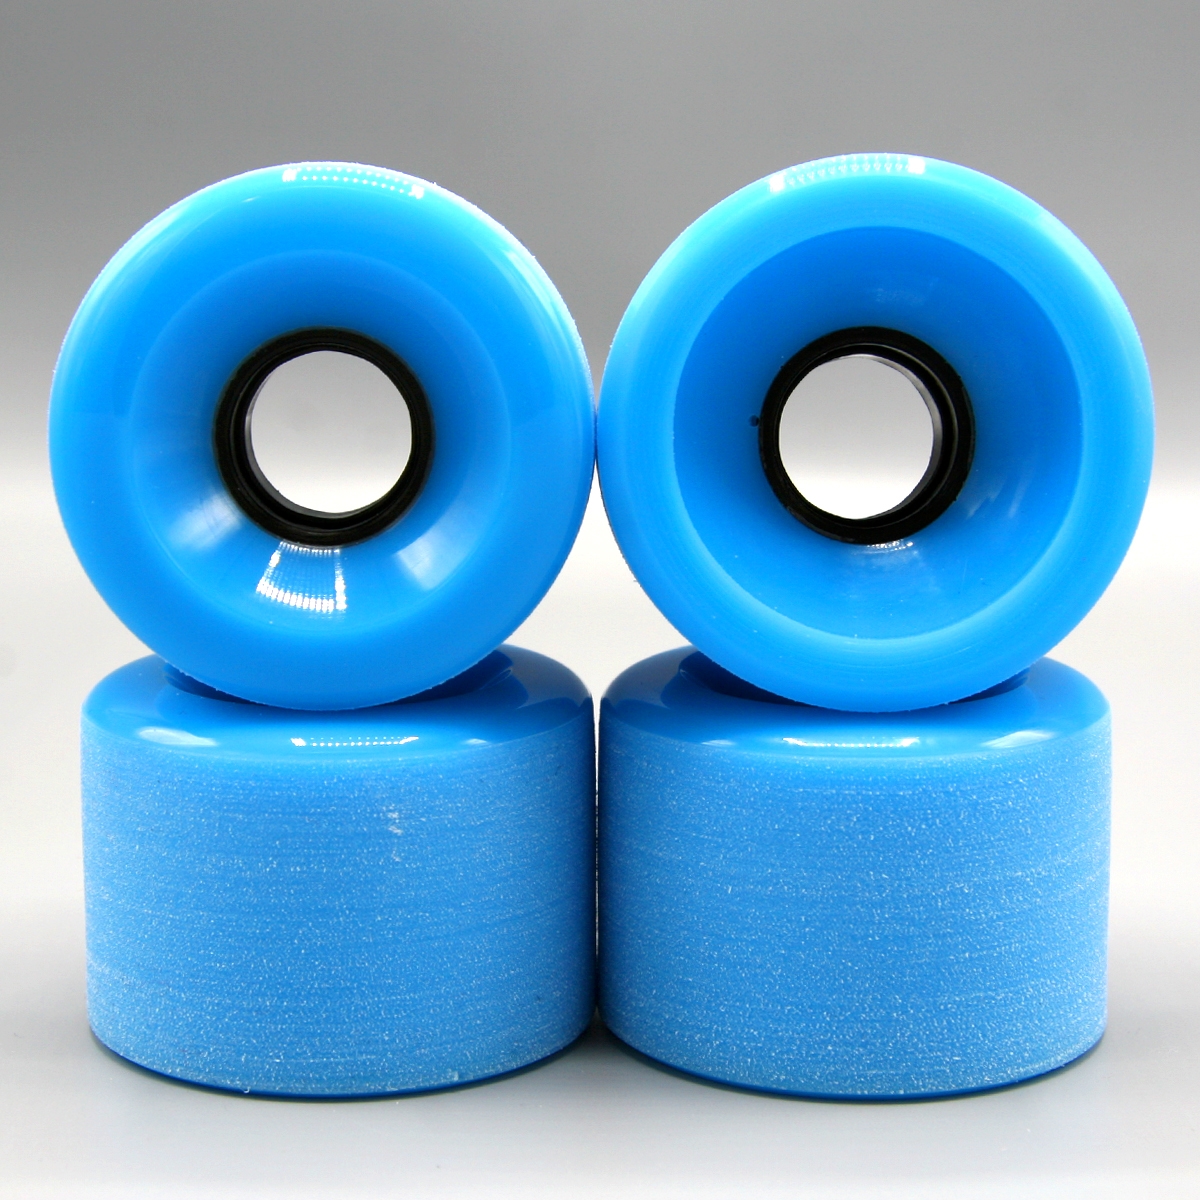 Blank 65mm (Solid Blue) - Includes 1/4" Risers